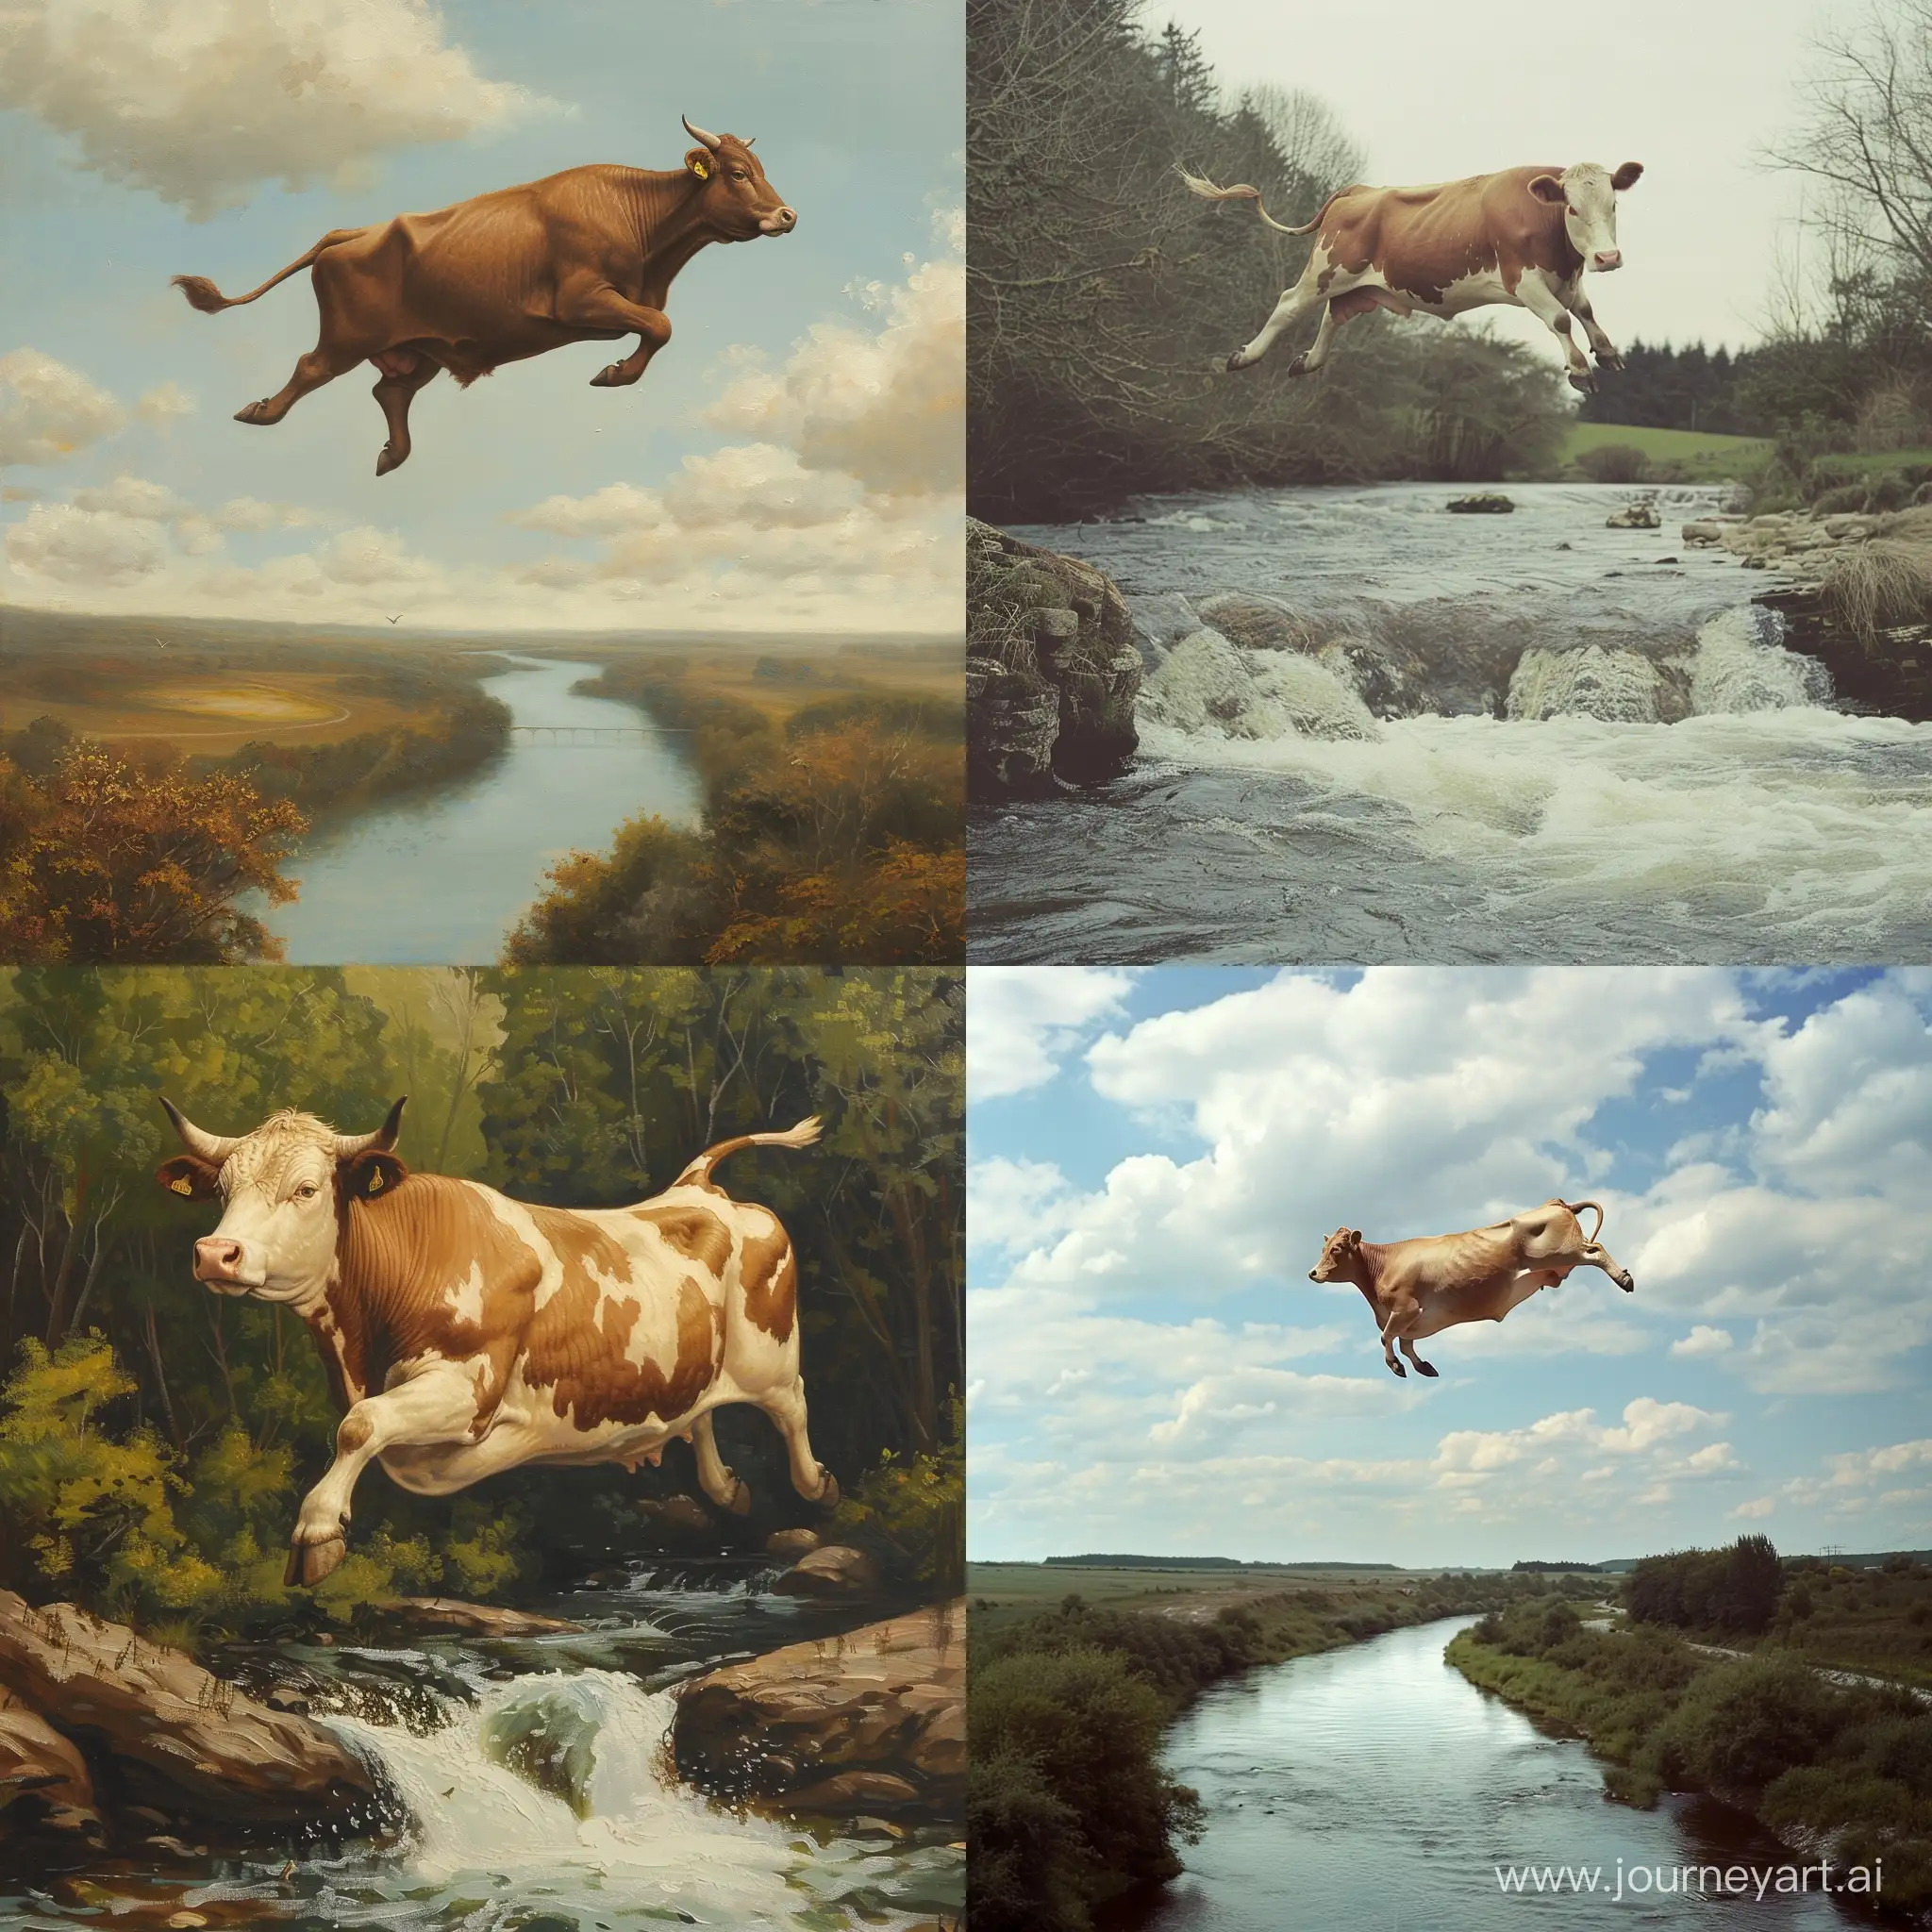 Majestic-Flying-Cow-Soaring-Over-Serene-River